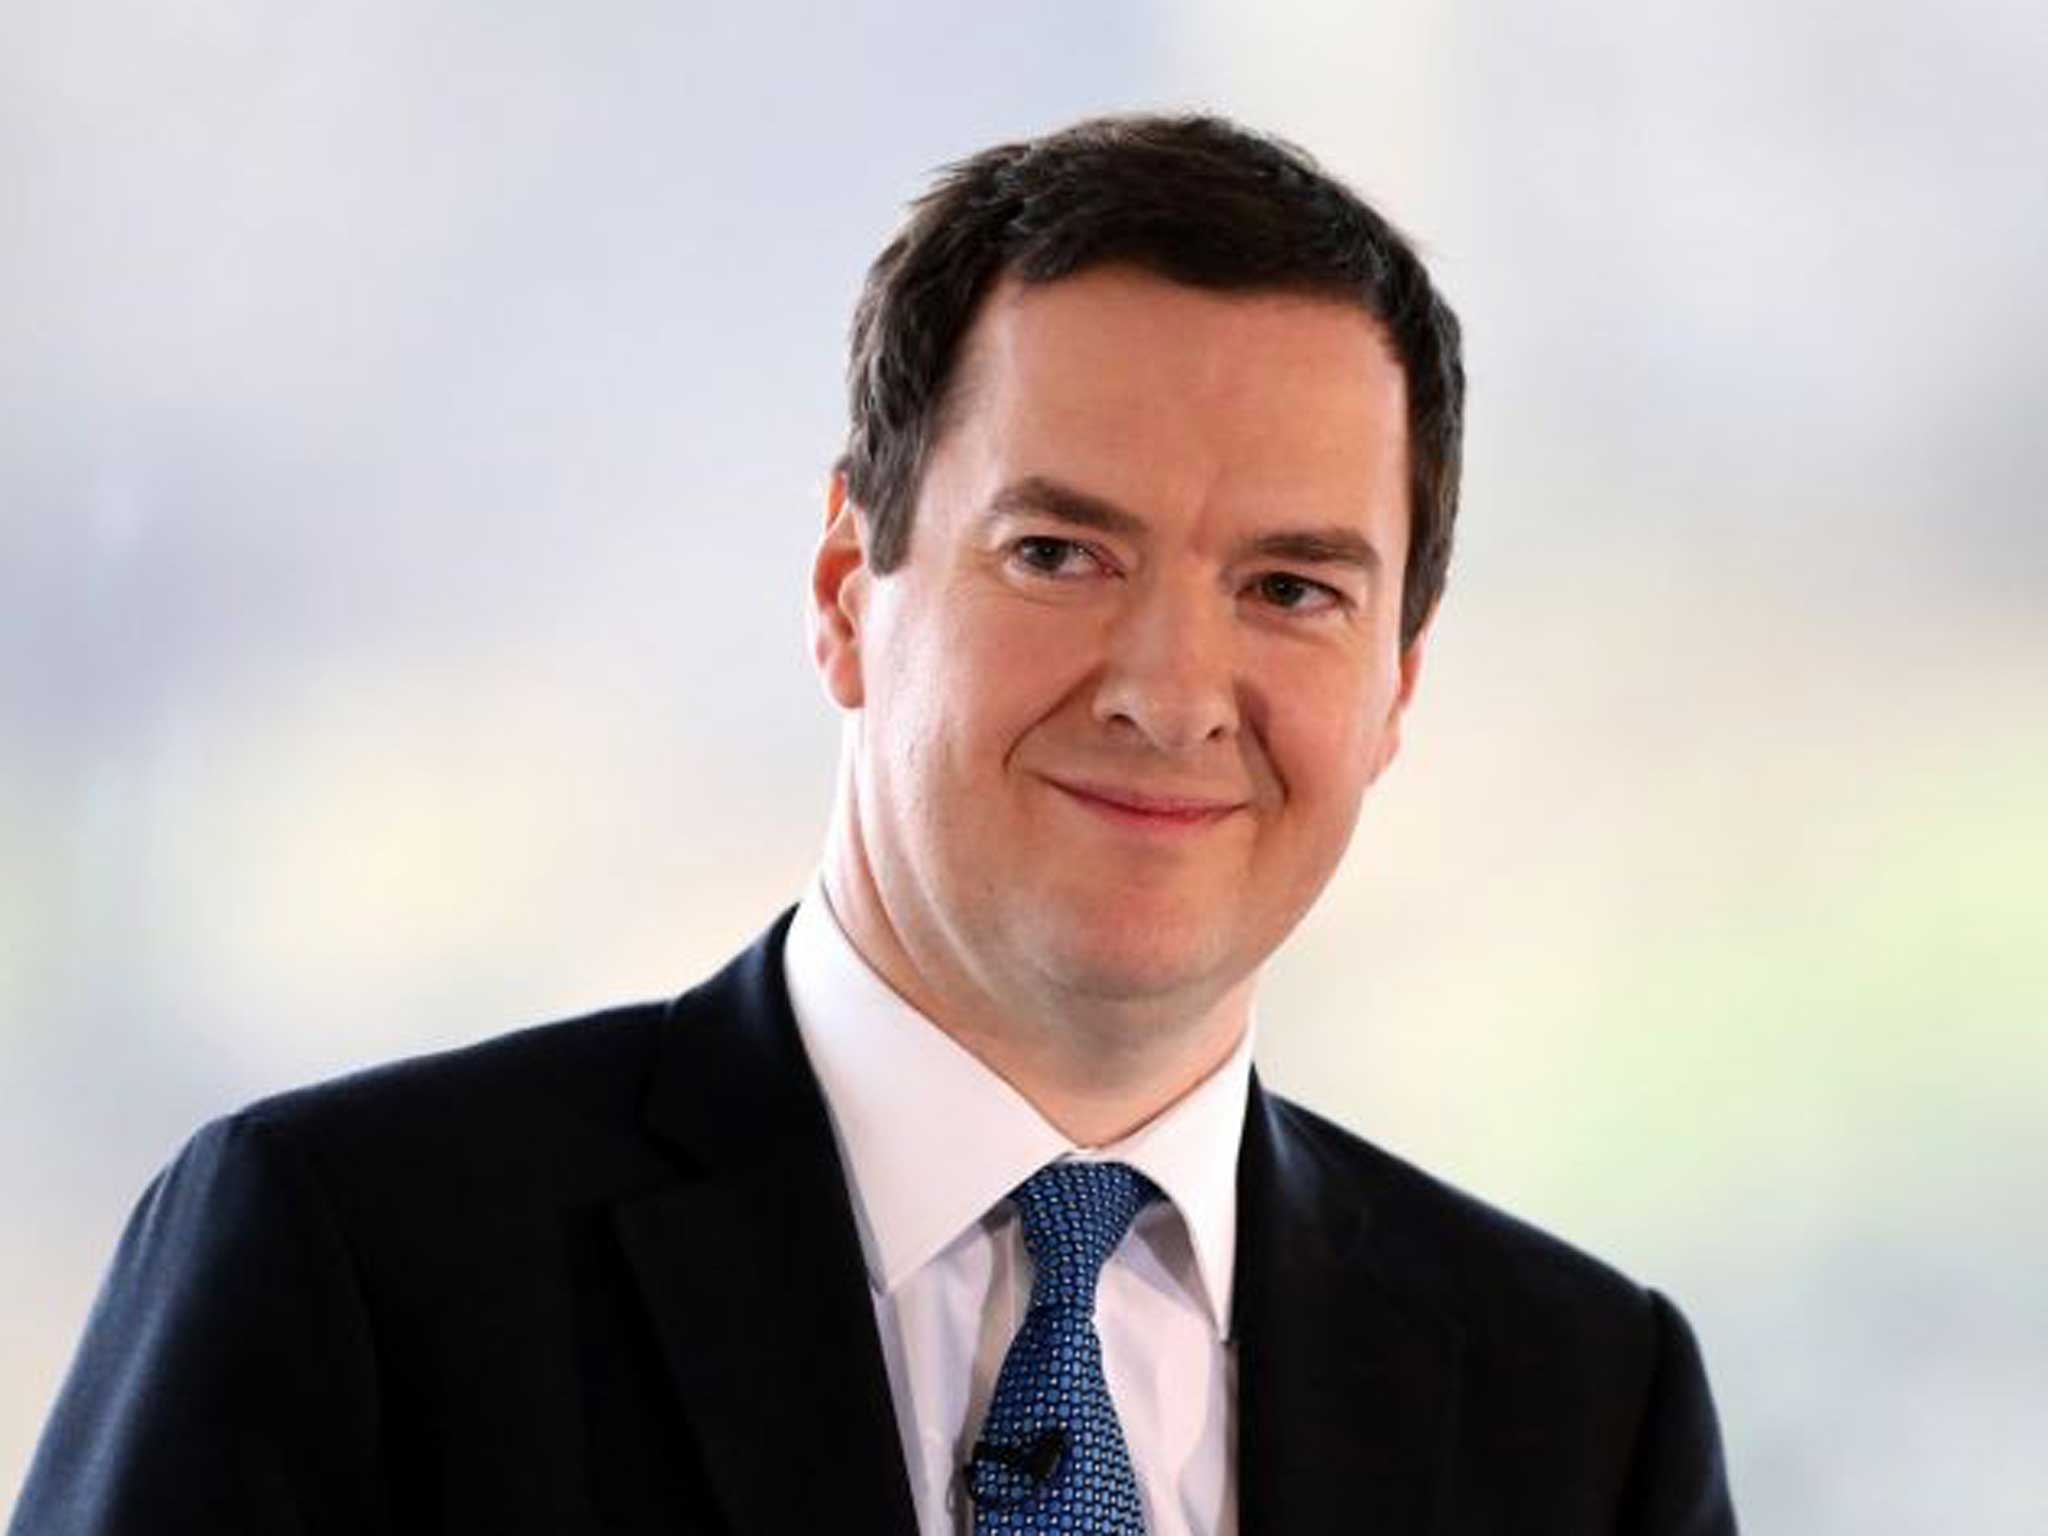 Could George Osborne be the next Conservative leader?